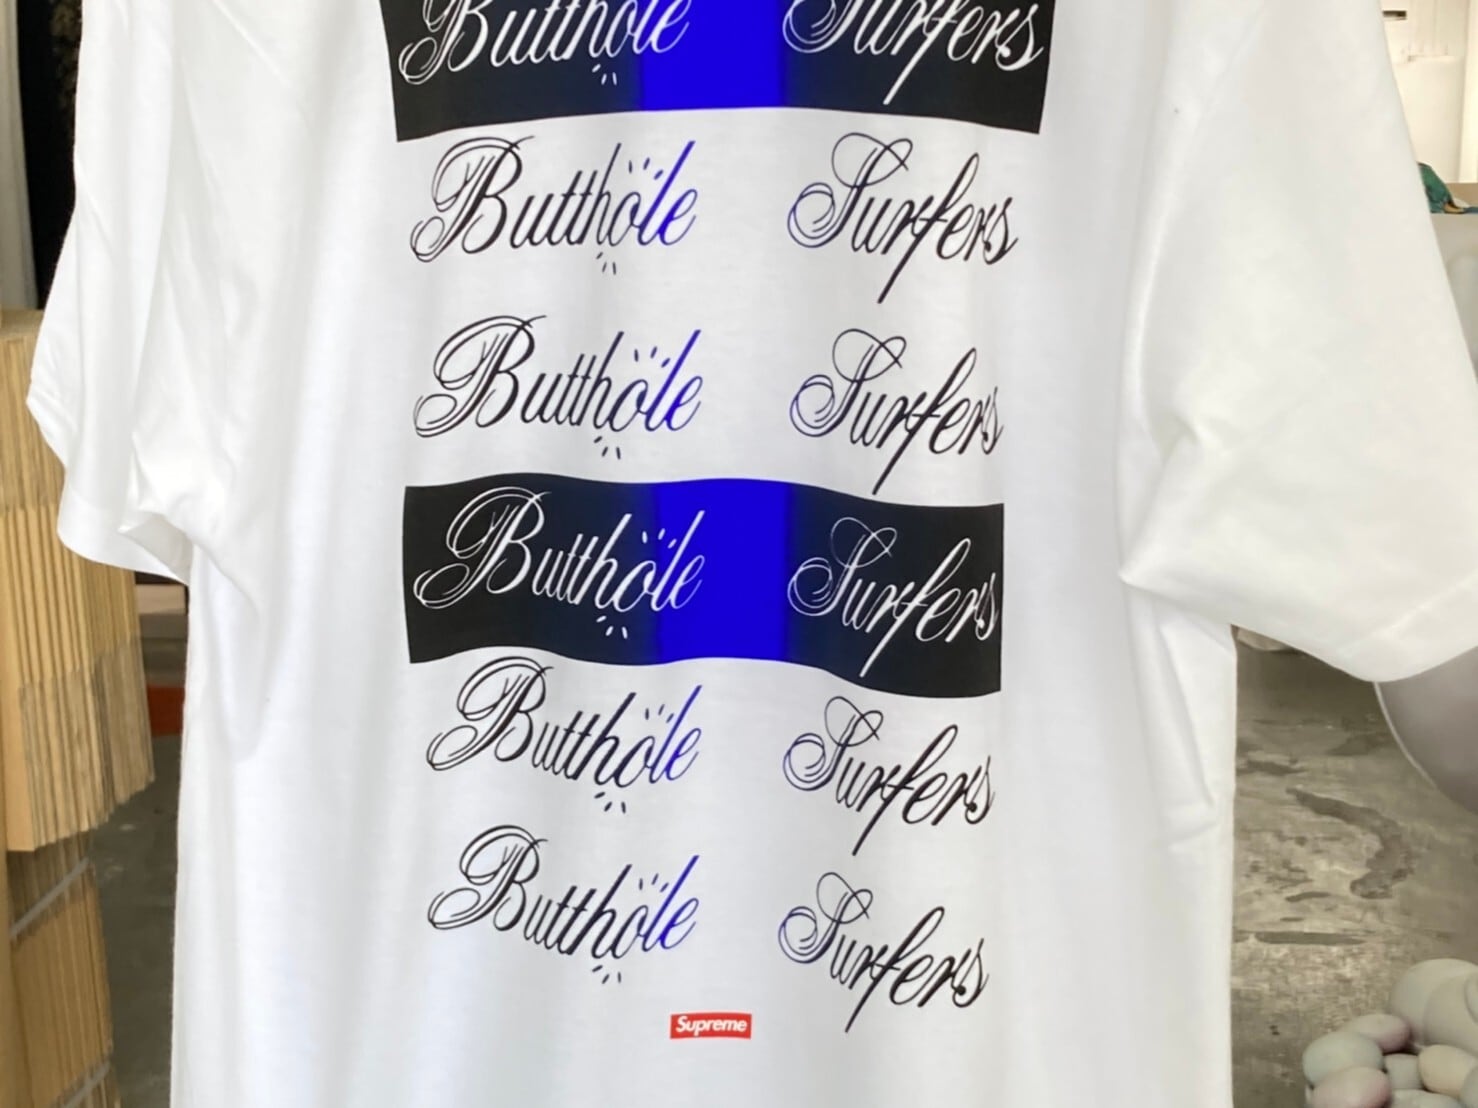 Supreme Butthole Surfers Tee White/XL